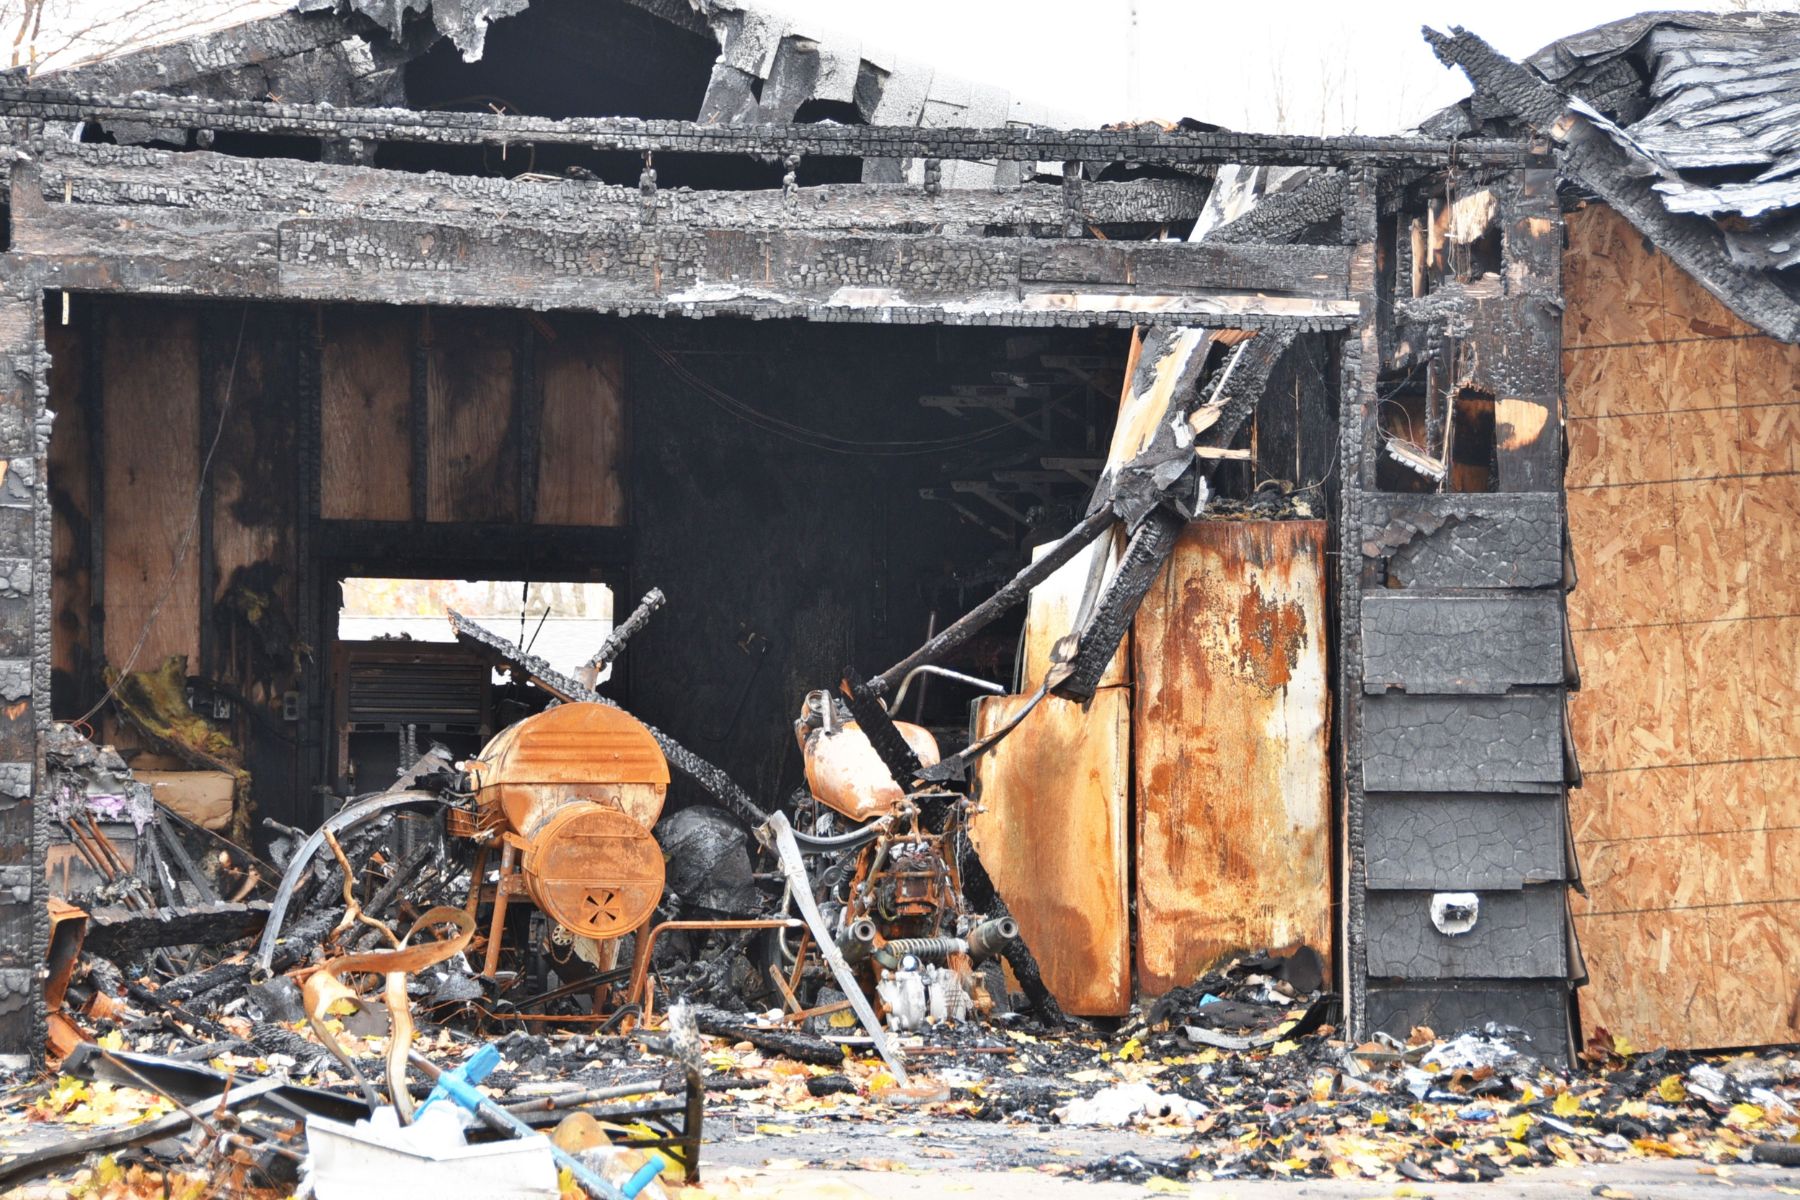 A home garage destroyed by fire